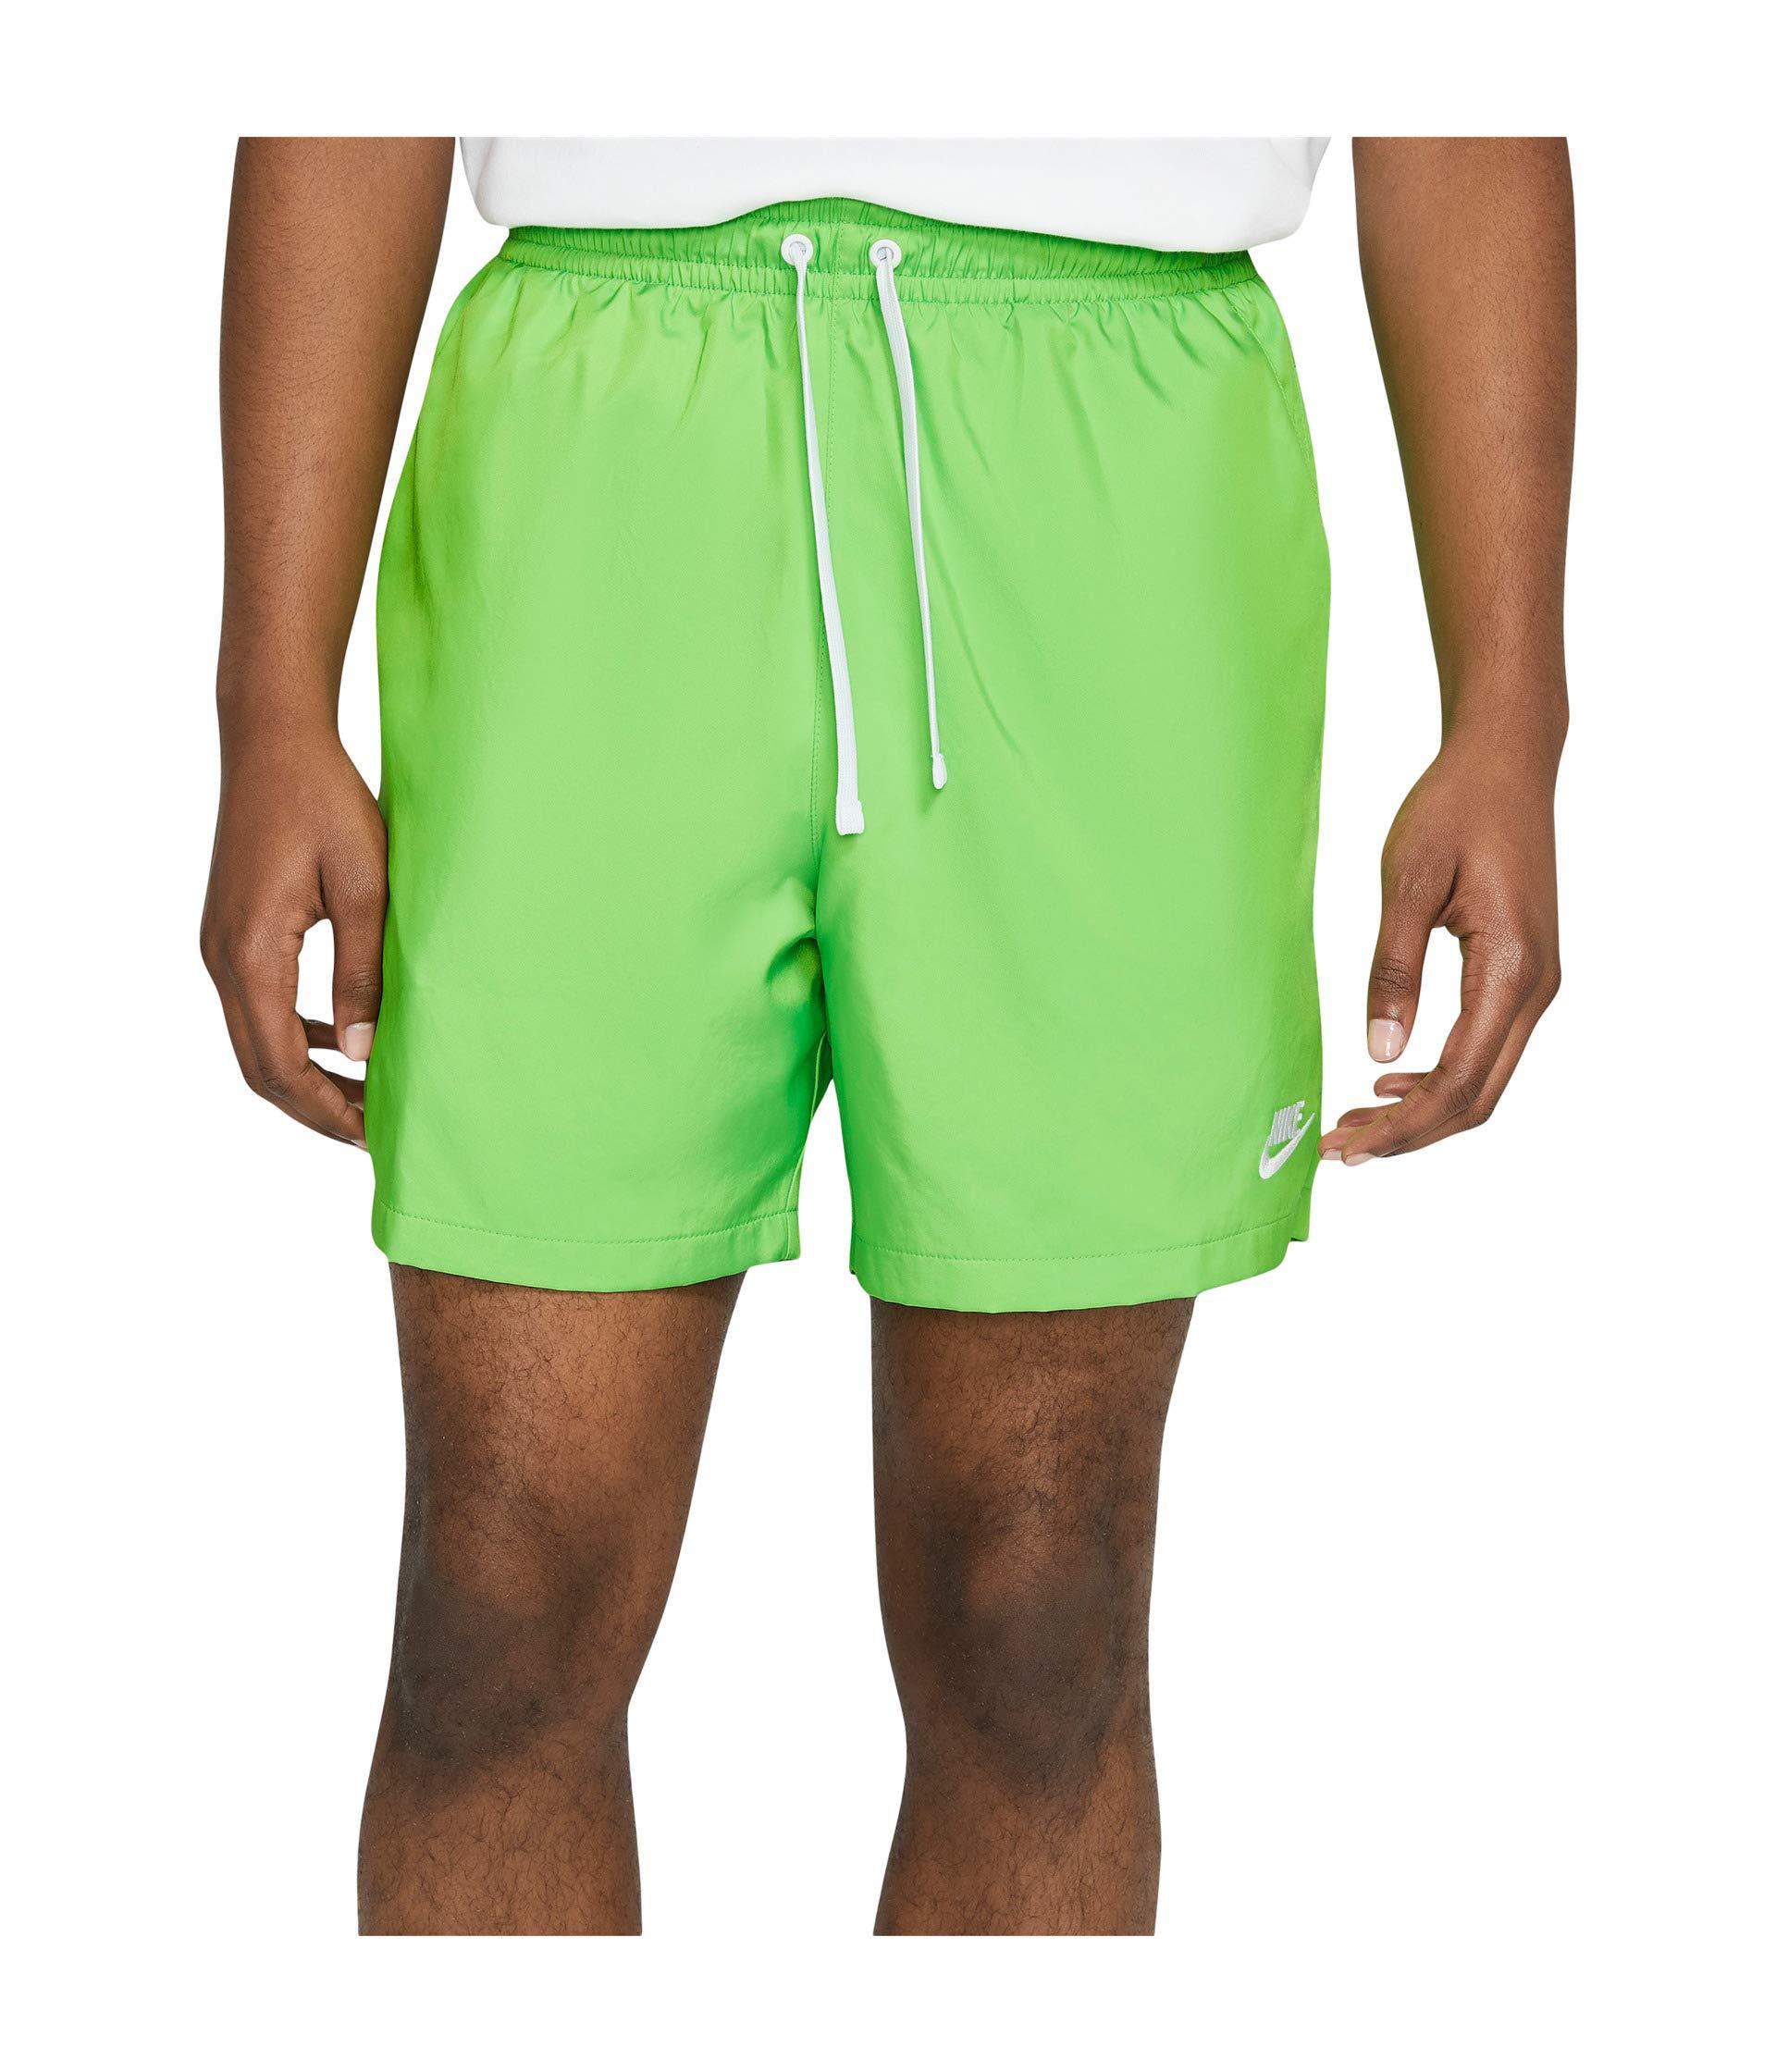 Assimilation dramatic completely flow shorts nike green hijack Sweep ...